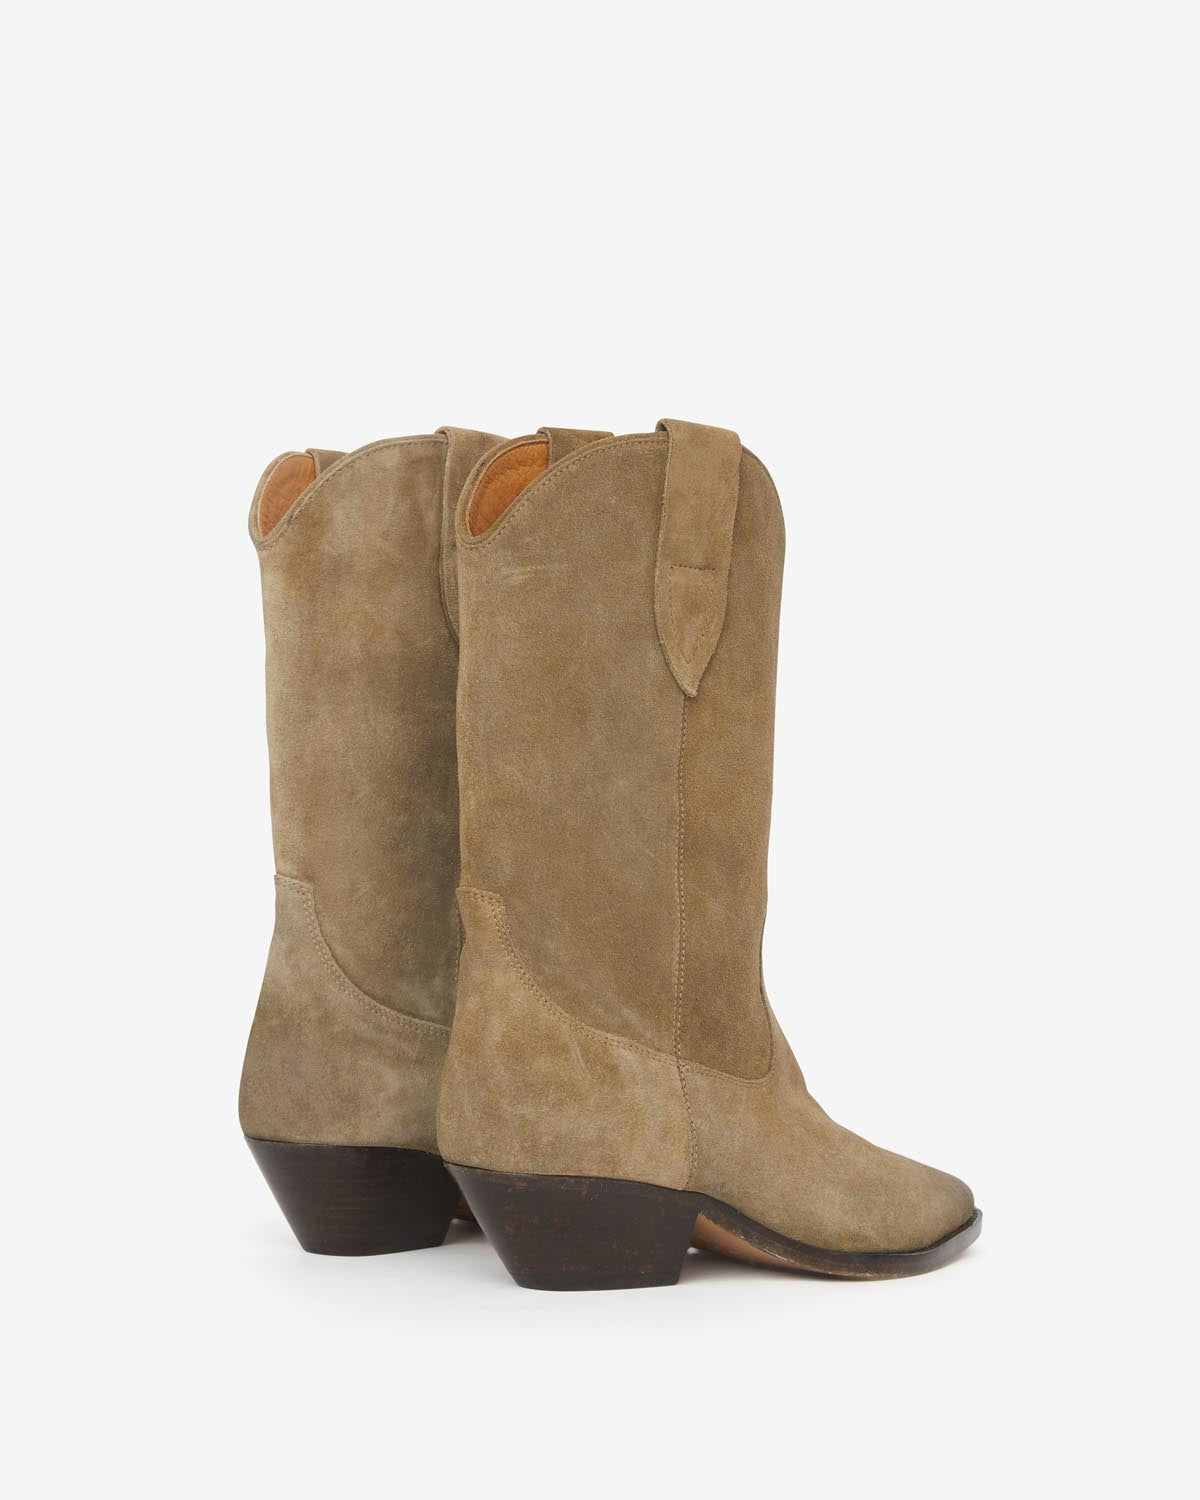 Stiefel duerto Woman Taupe 3